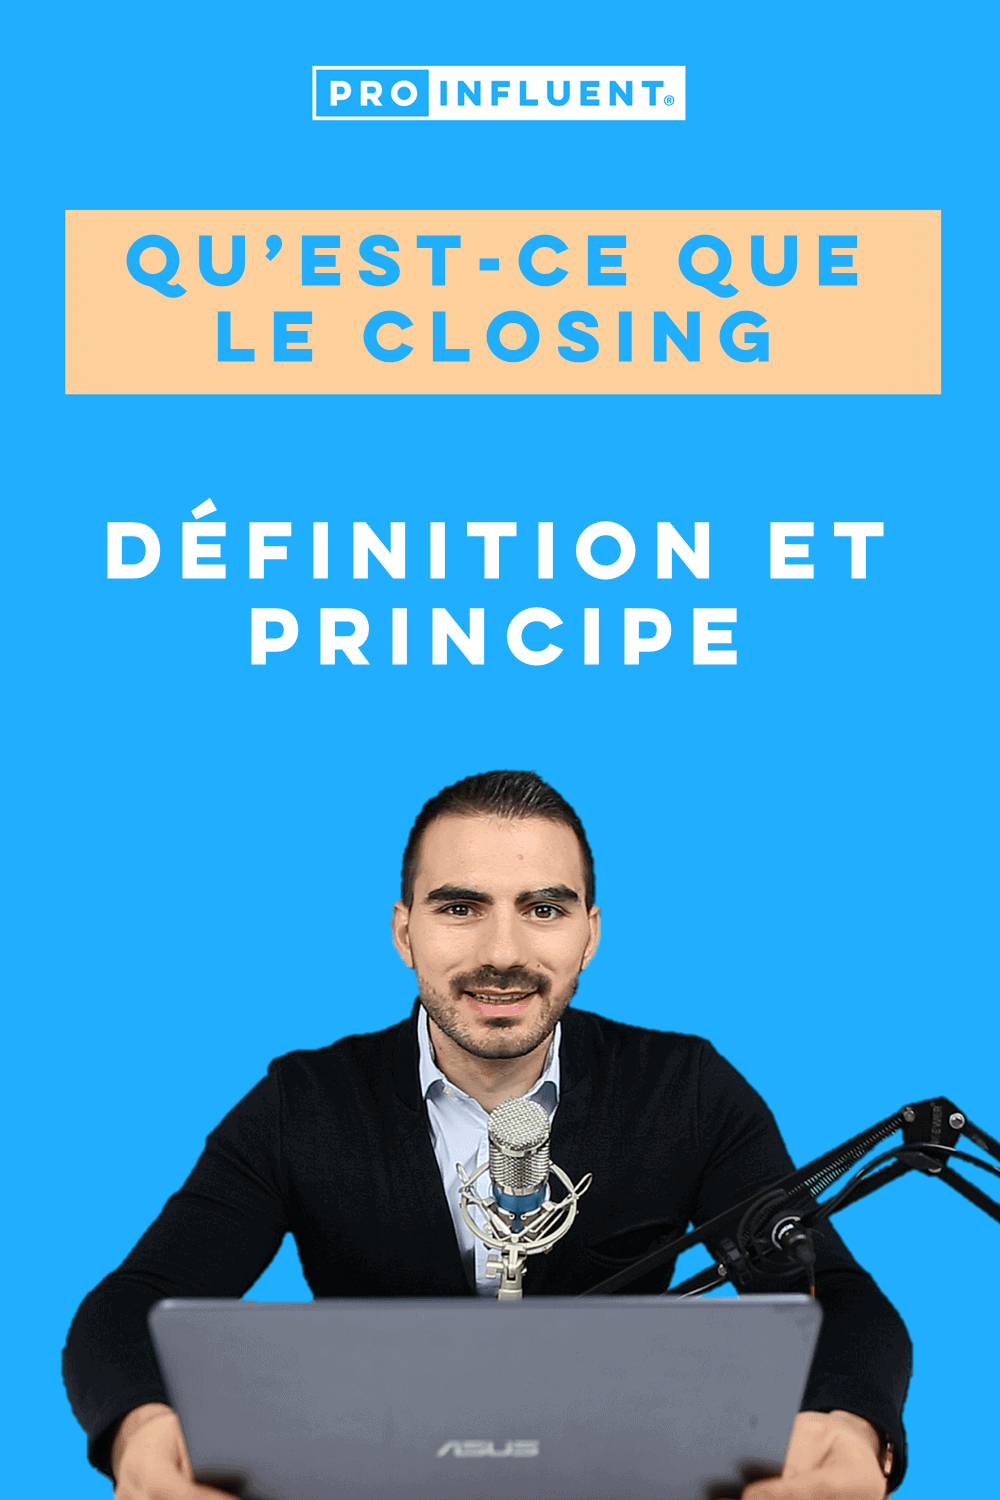 What is the closing? Definition and principle